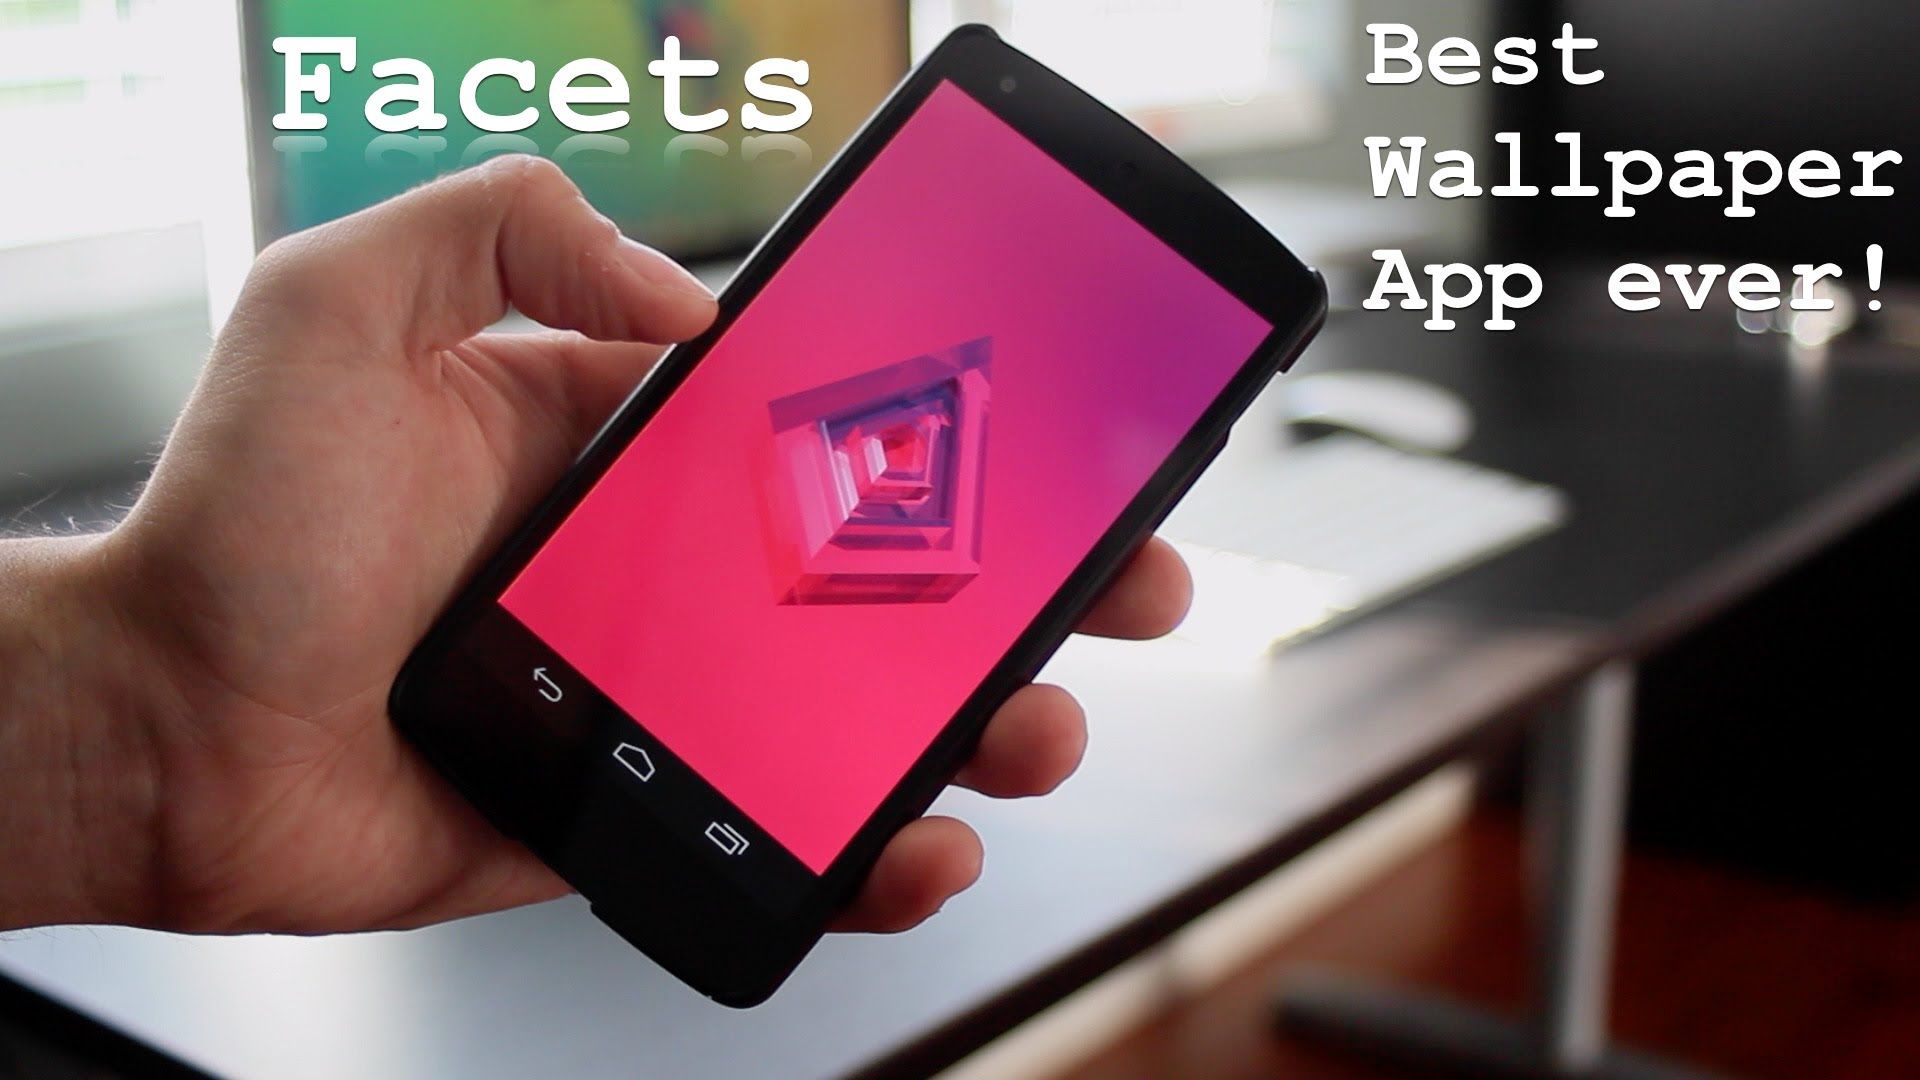 Facets - Best Wallpaper App on Android Google Play App - YouTube